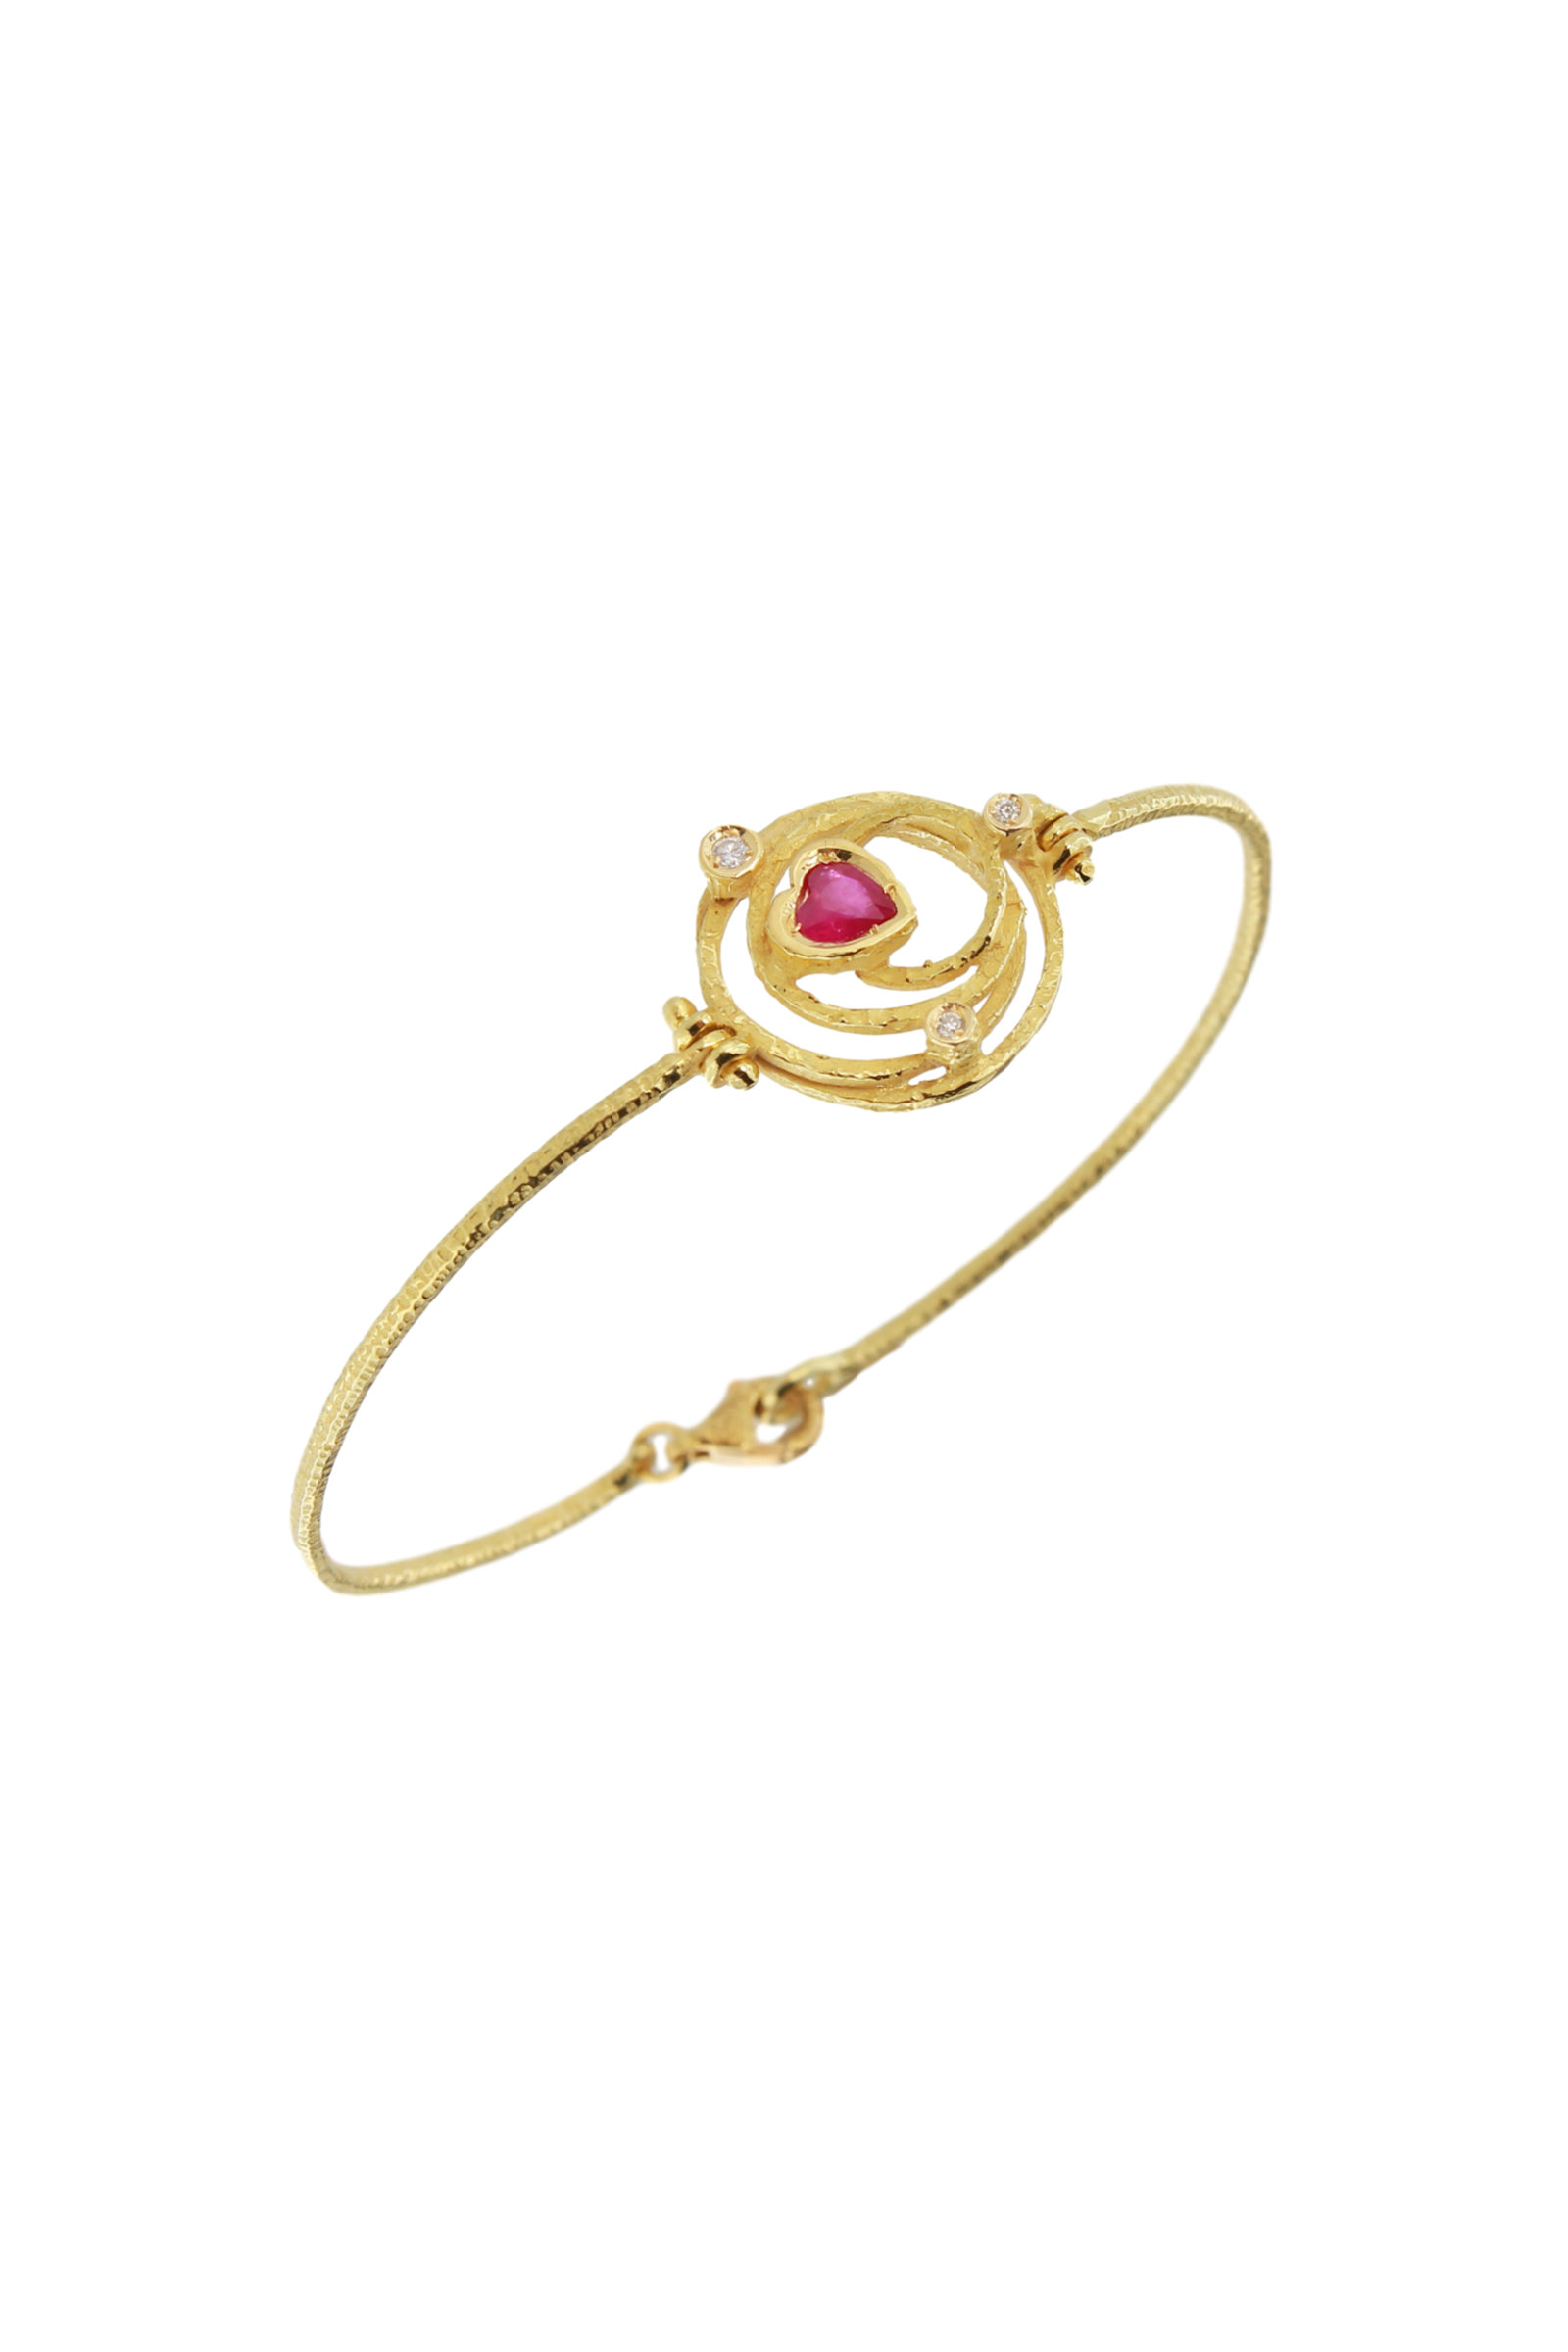 SB304RUB-18-Kt-Yellow-Gold-Bracelet-with-Heart-Ruby-and-Diamonds-1